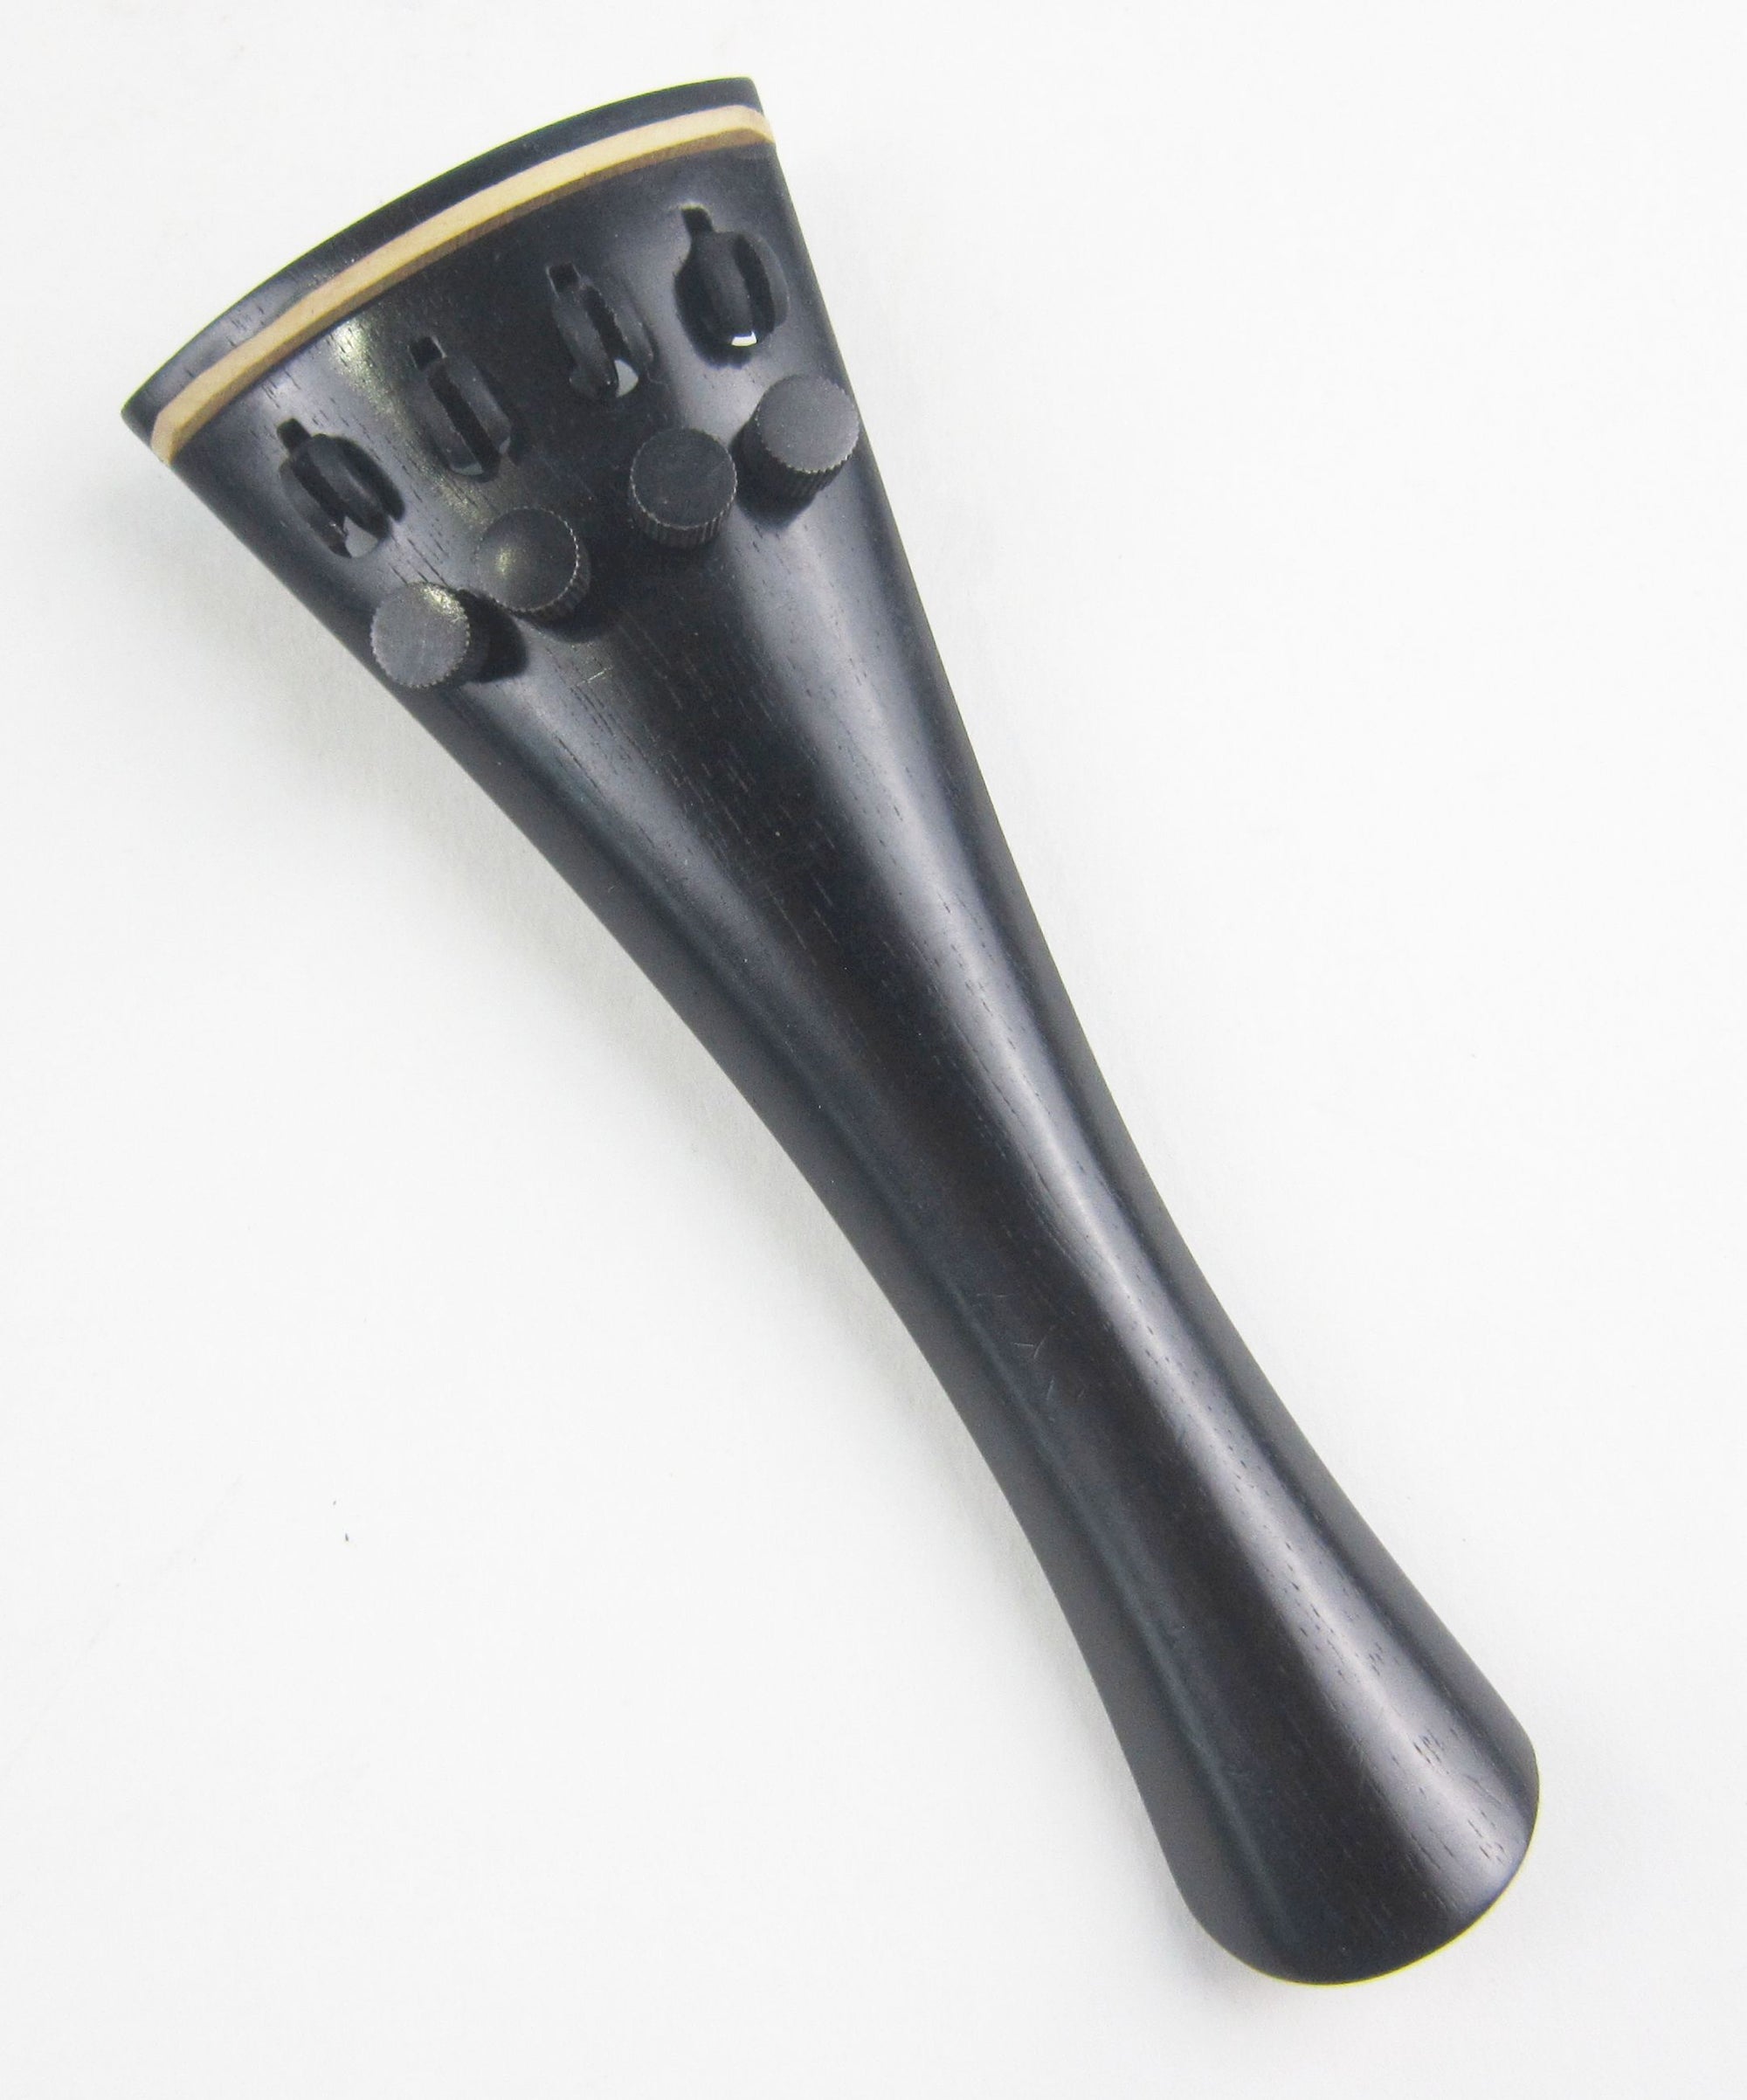 violin tailpiece-French-Ebony-"Schmidt tailpiece"-white saddle-4 tuner